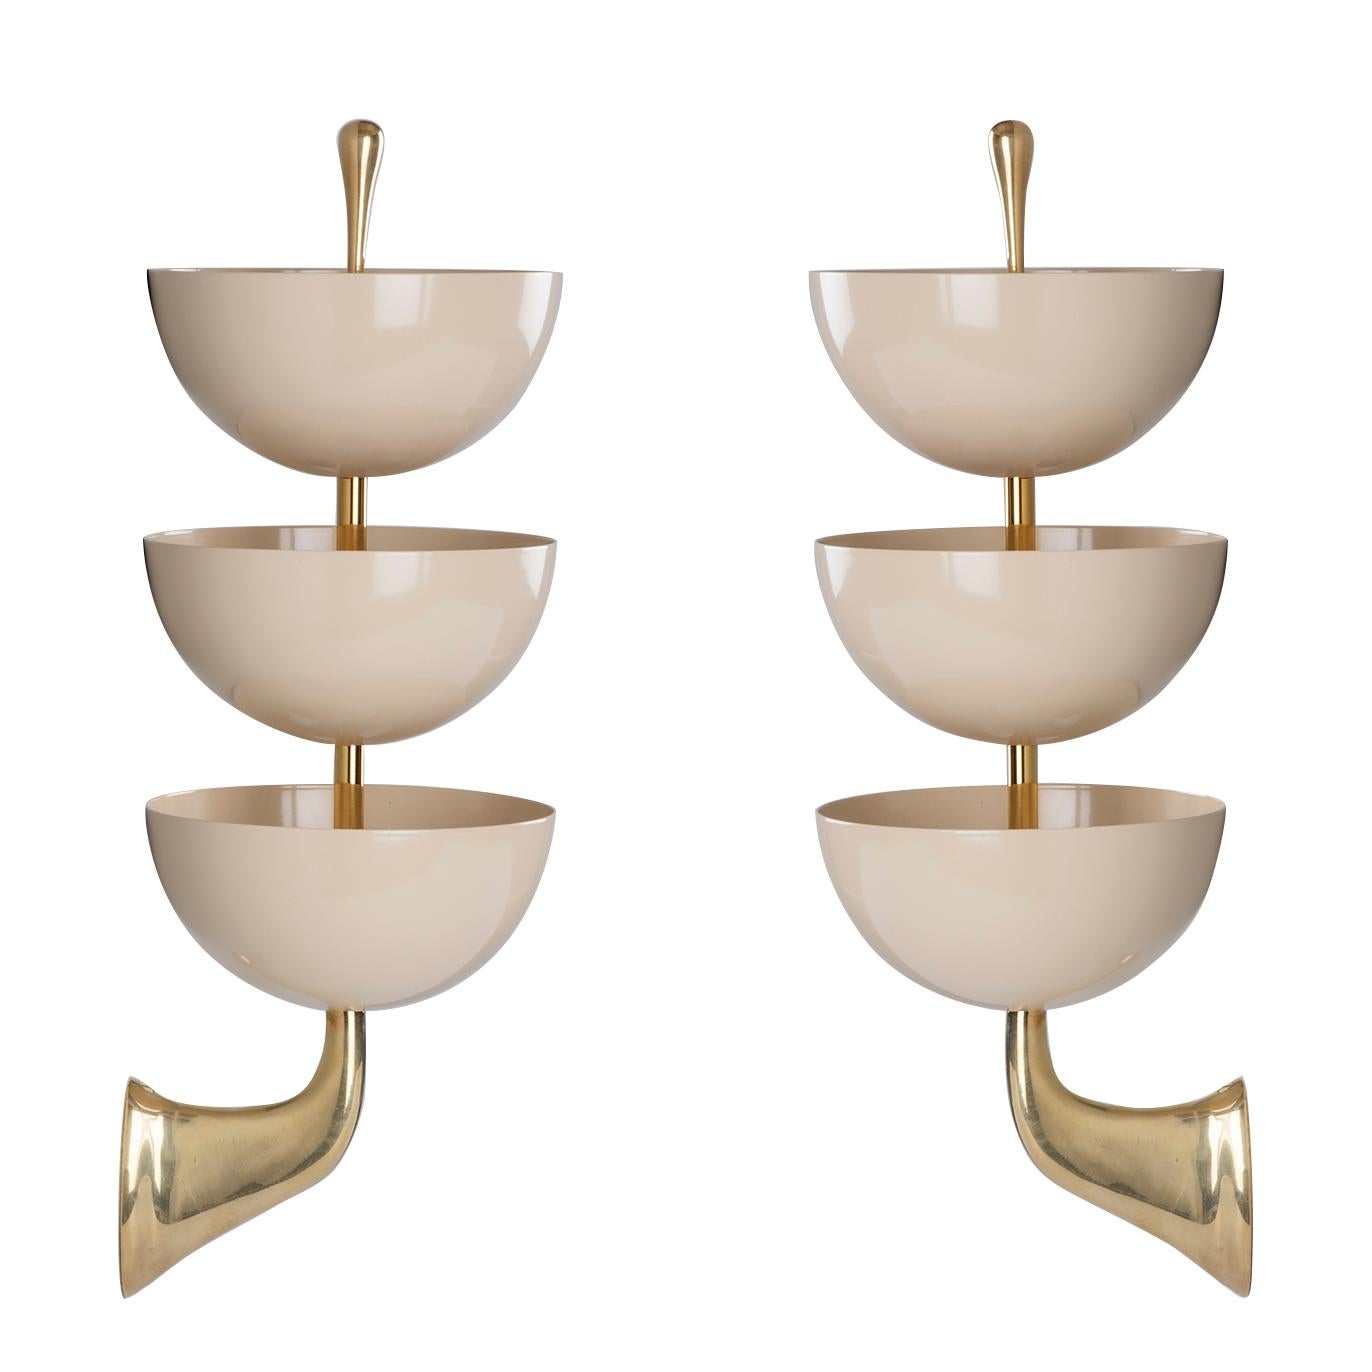 Exquisite Pair of Tiered White Enamel and Brass Sconces by Stilnovo, Italy 1950s